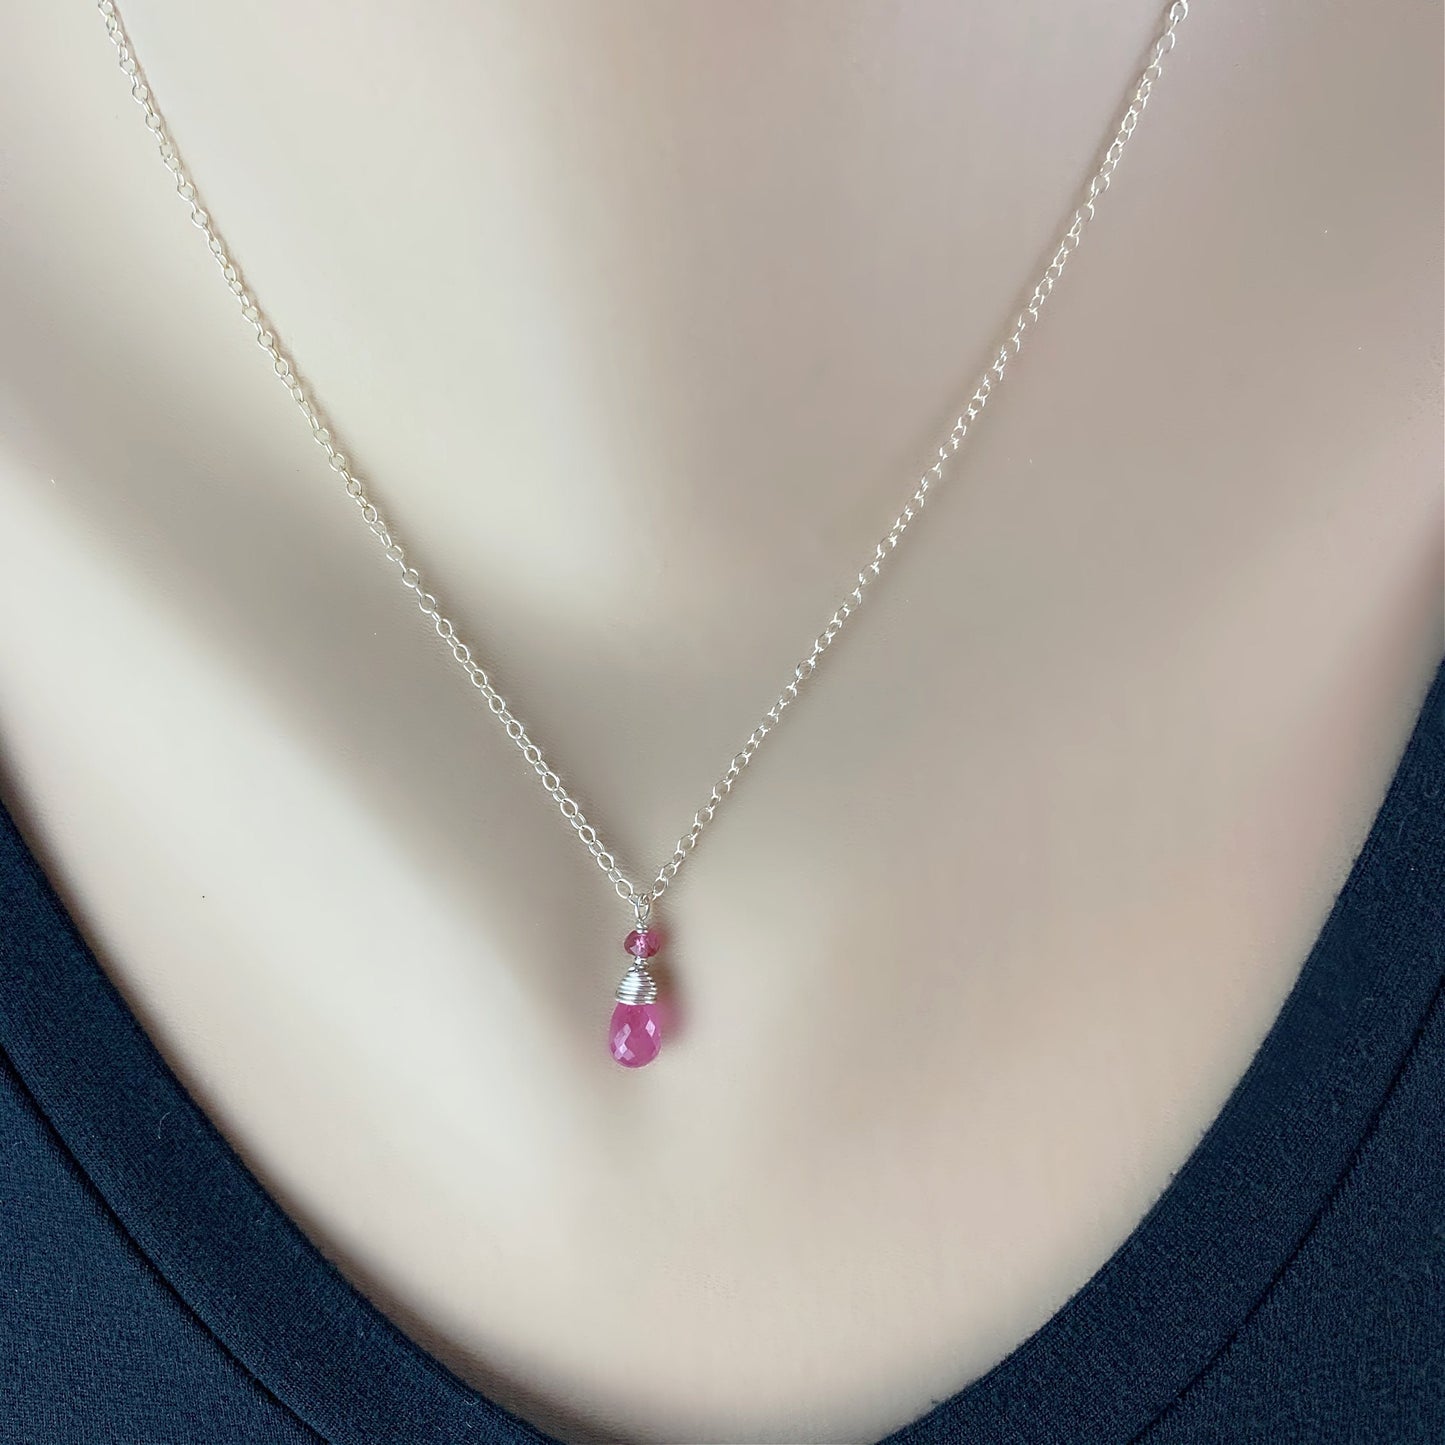 Sapphire Necklace Pink Sapphire September Birthstone Gold Necklace Silver Necklace Necklace for Women Layering Necklace Gift for Her